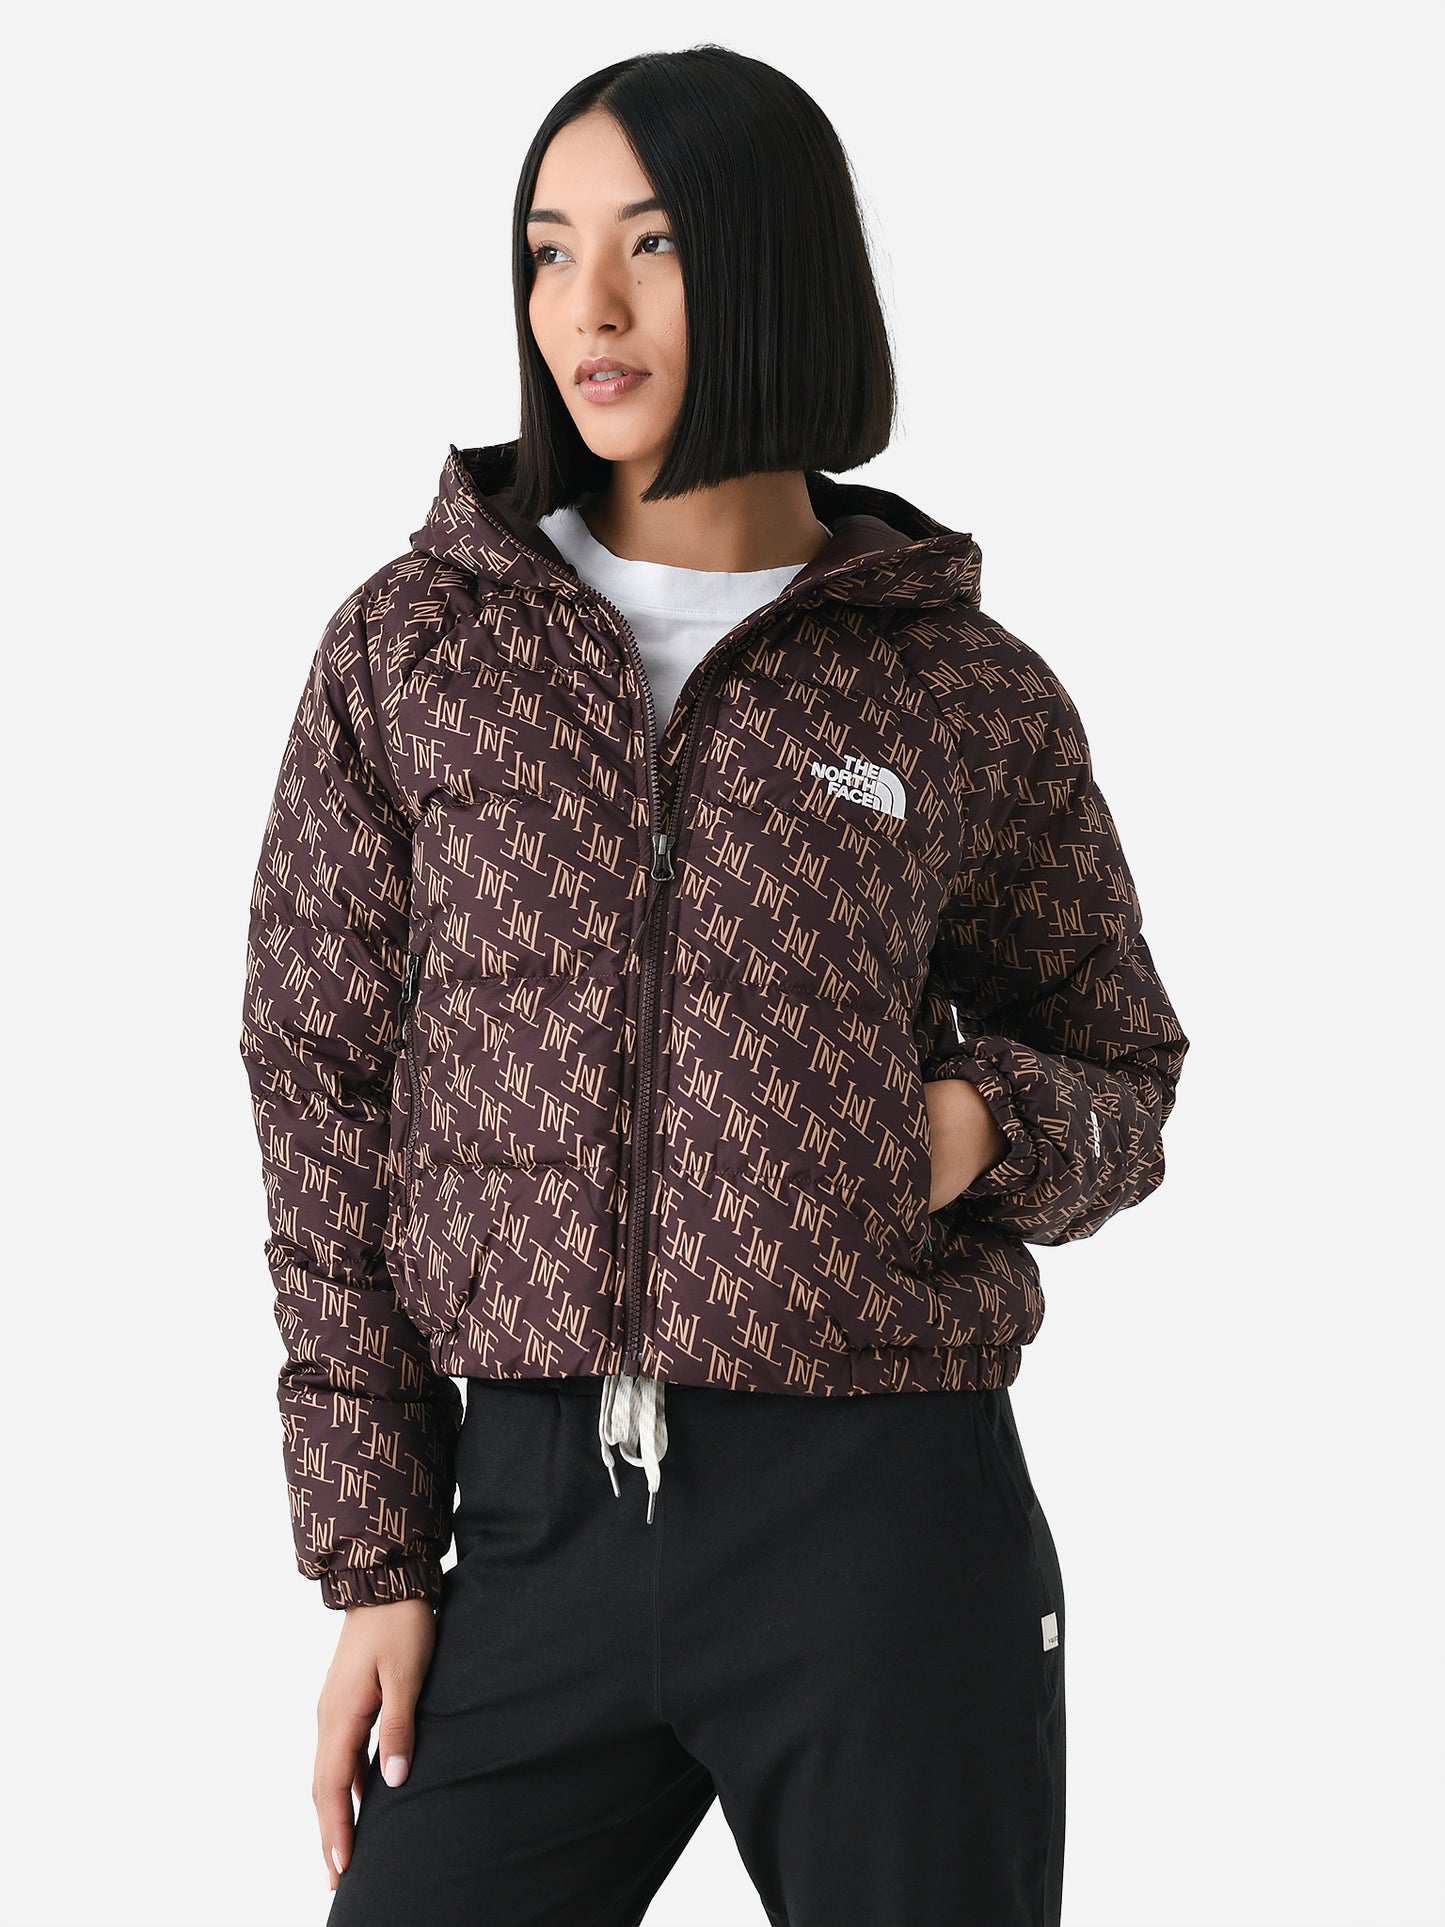 The North Face Women’s Hydrenalite™ Down Hoodie